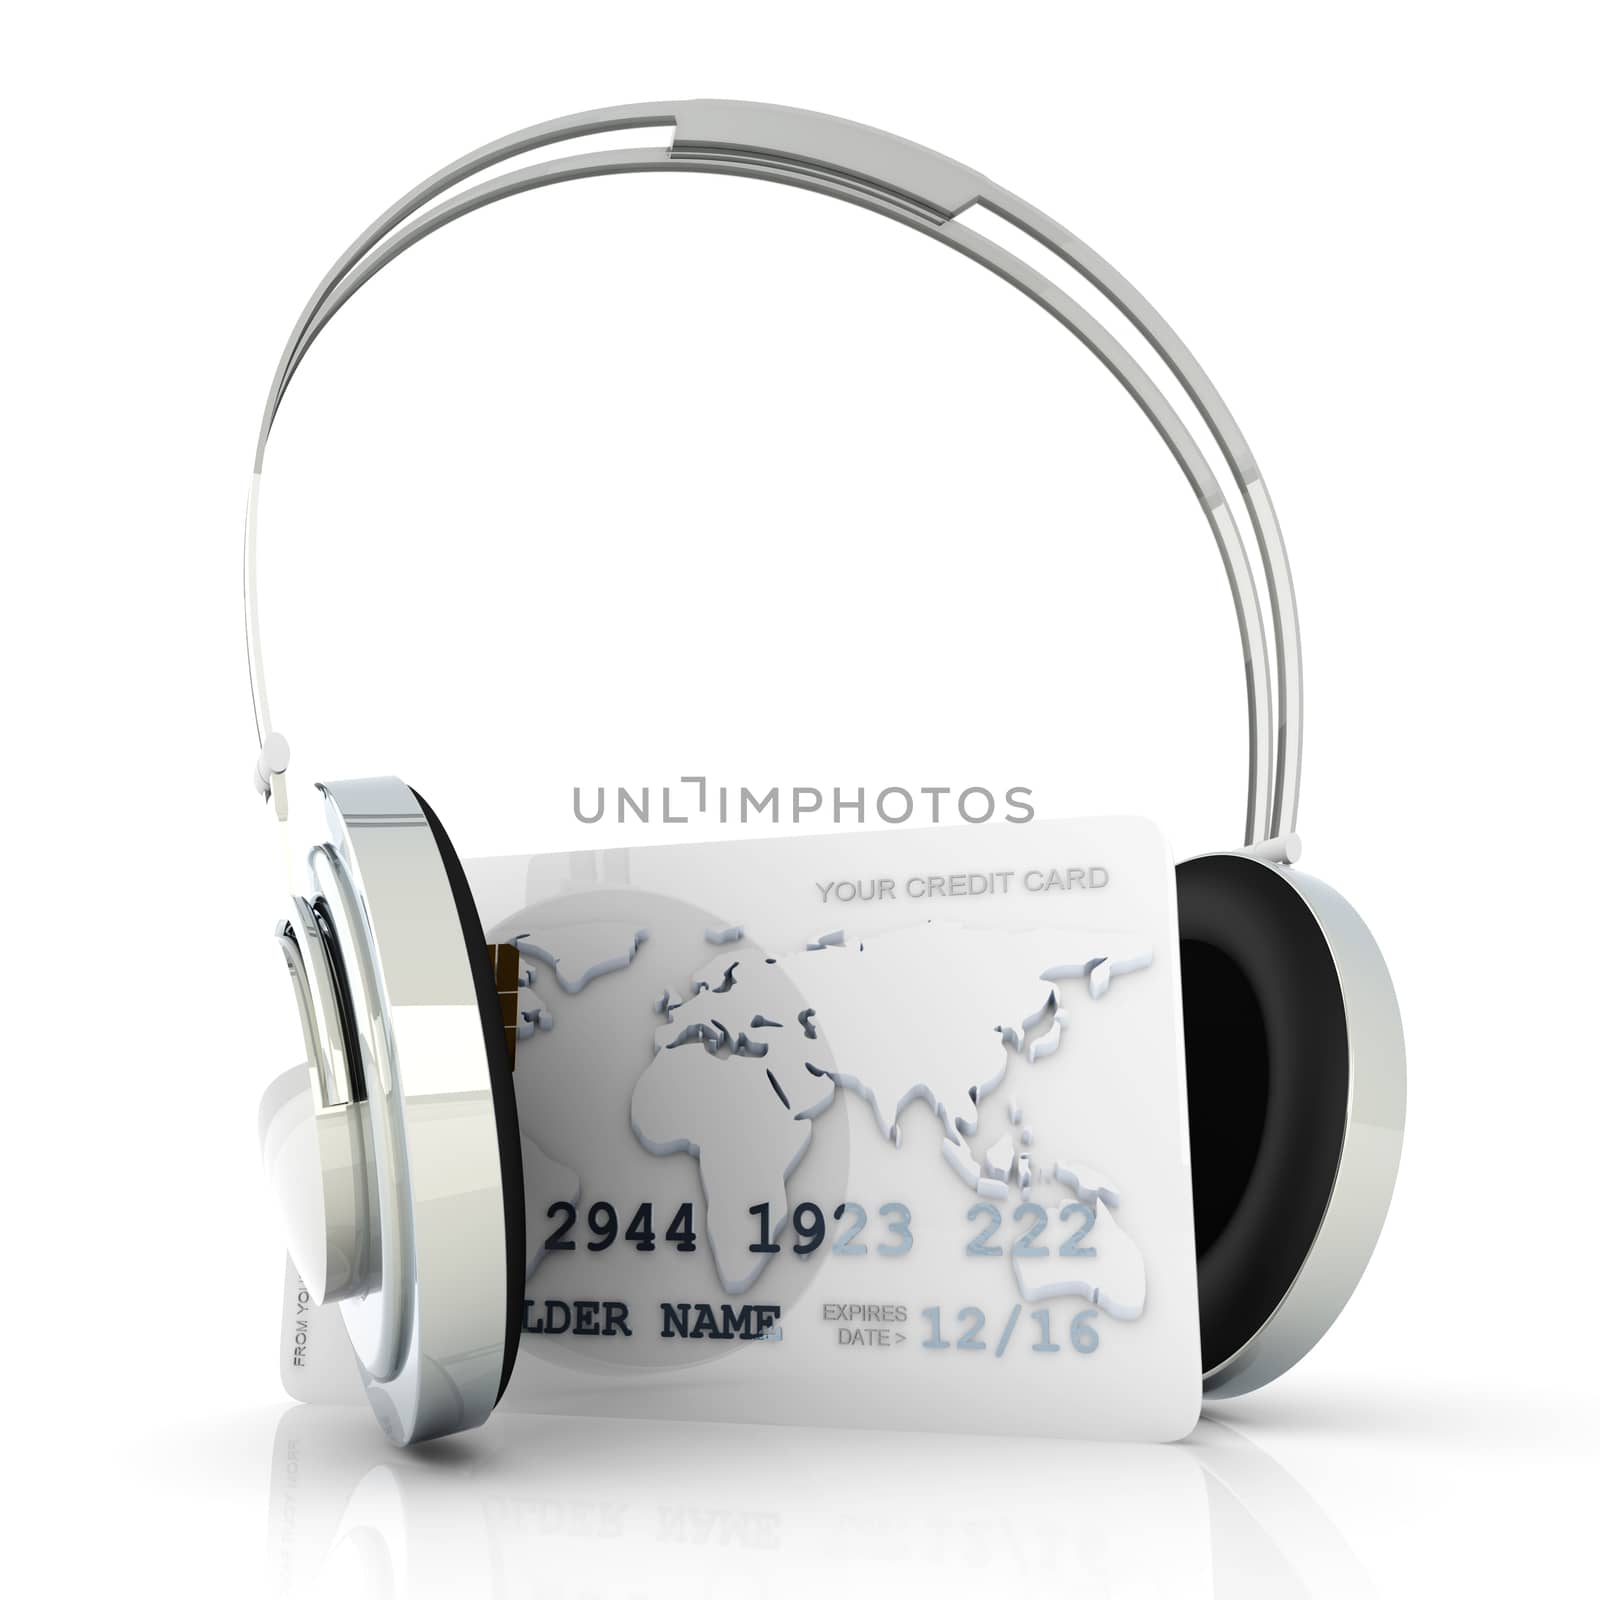 Buying Audio with credit card. 3D rendered illustration. Isolated on white.